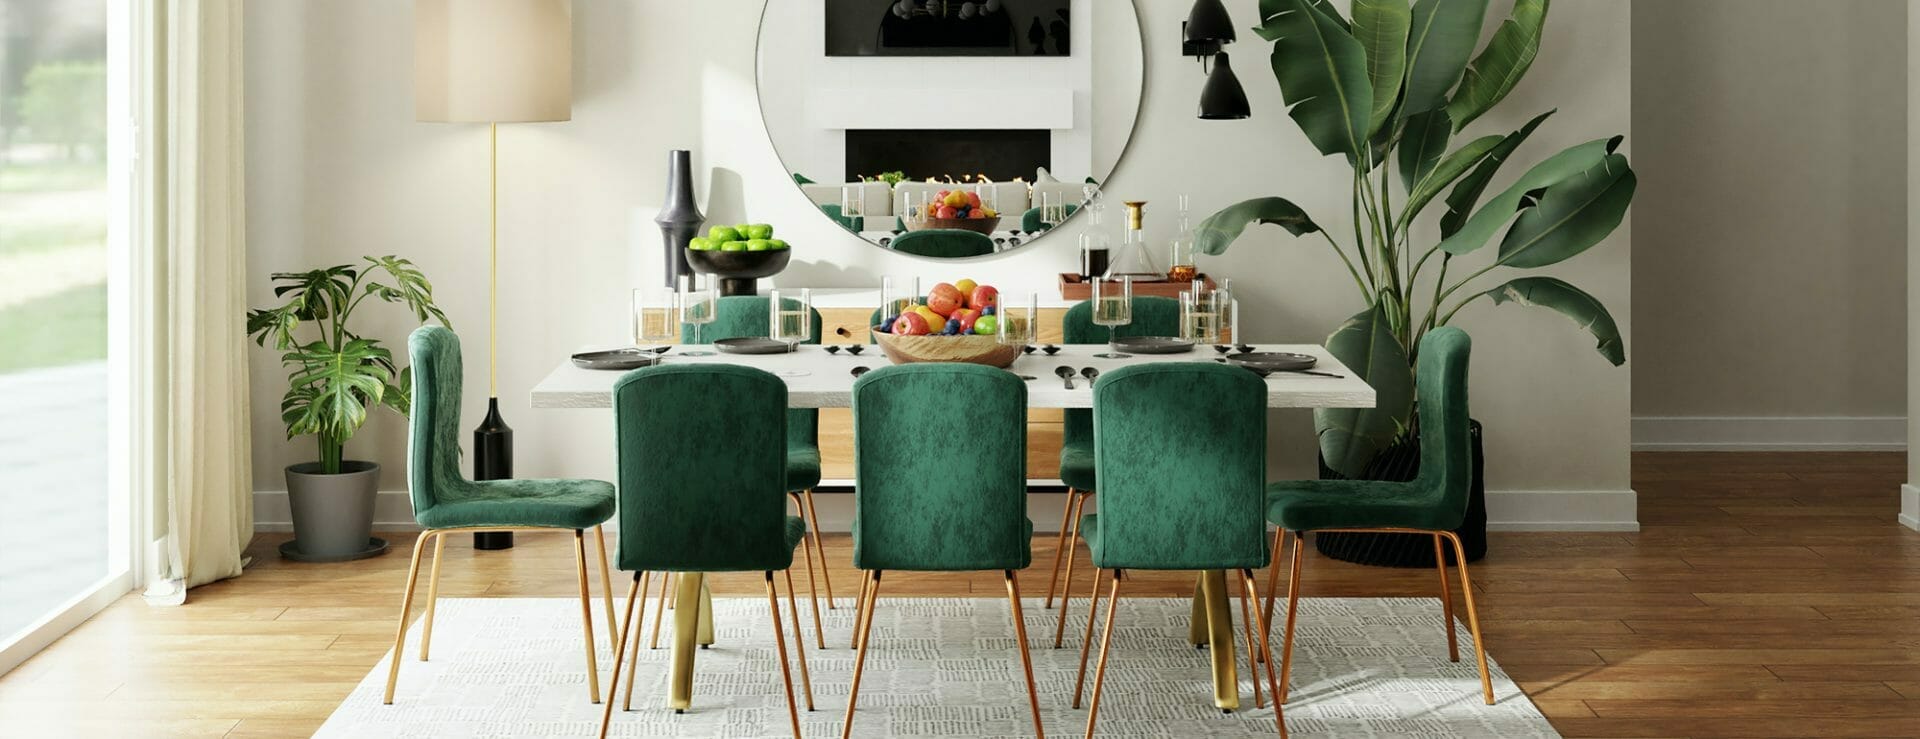 10 Ideas for a Non-Traditional Dining Room - First Security Mortgage